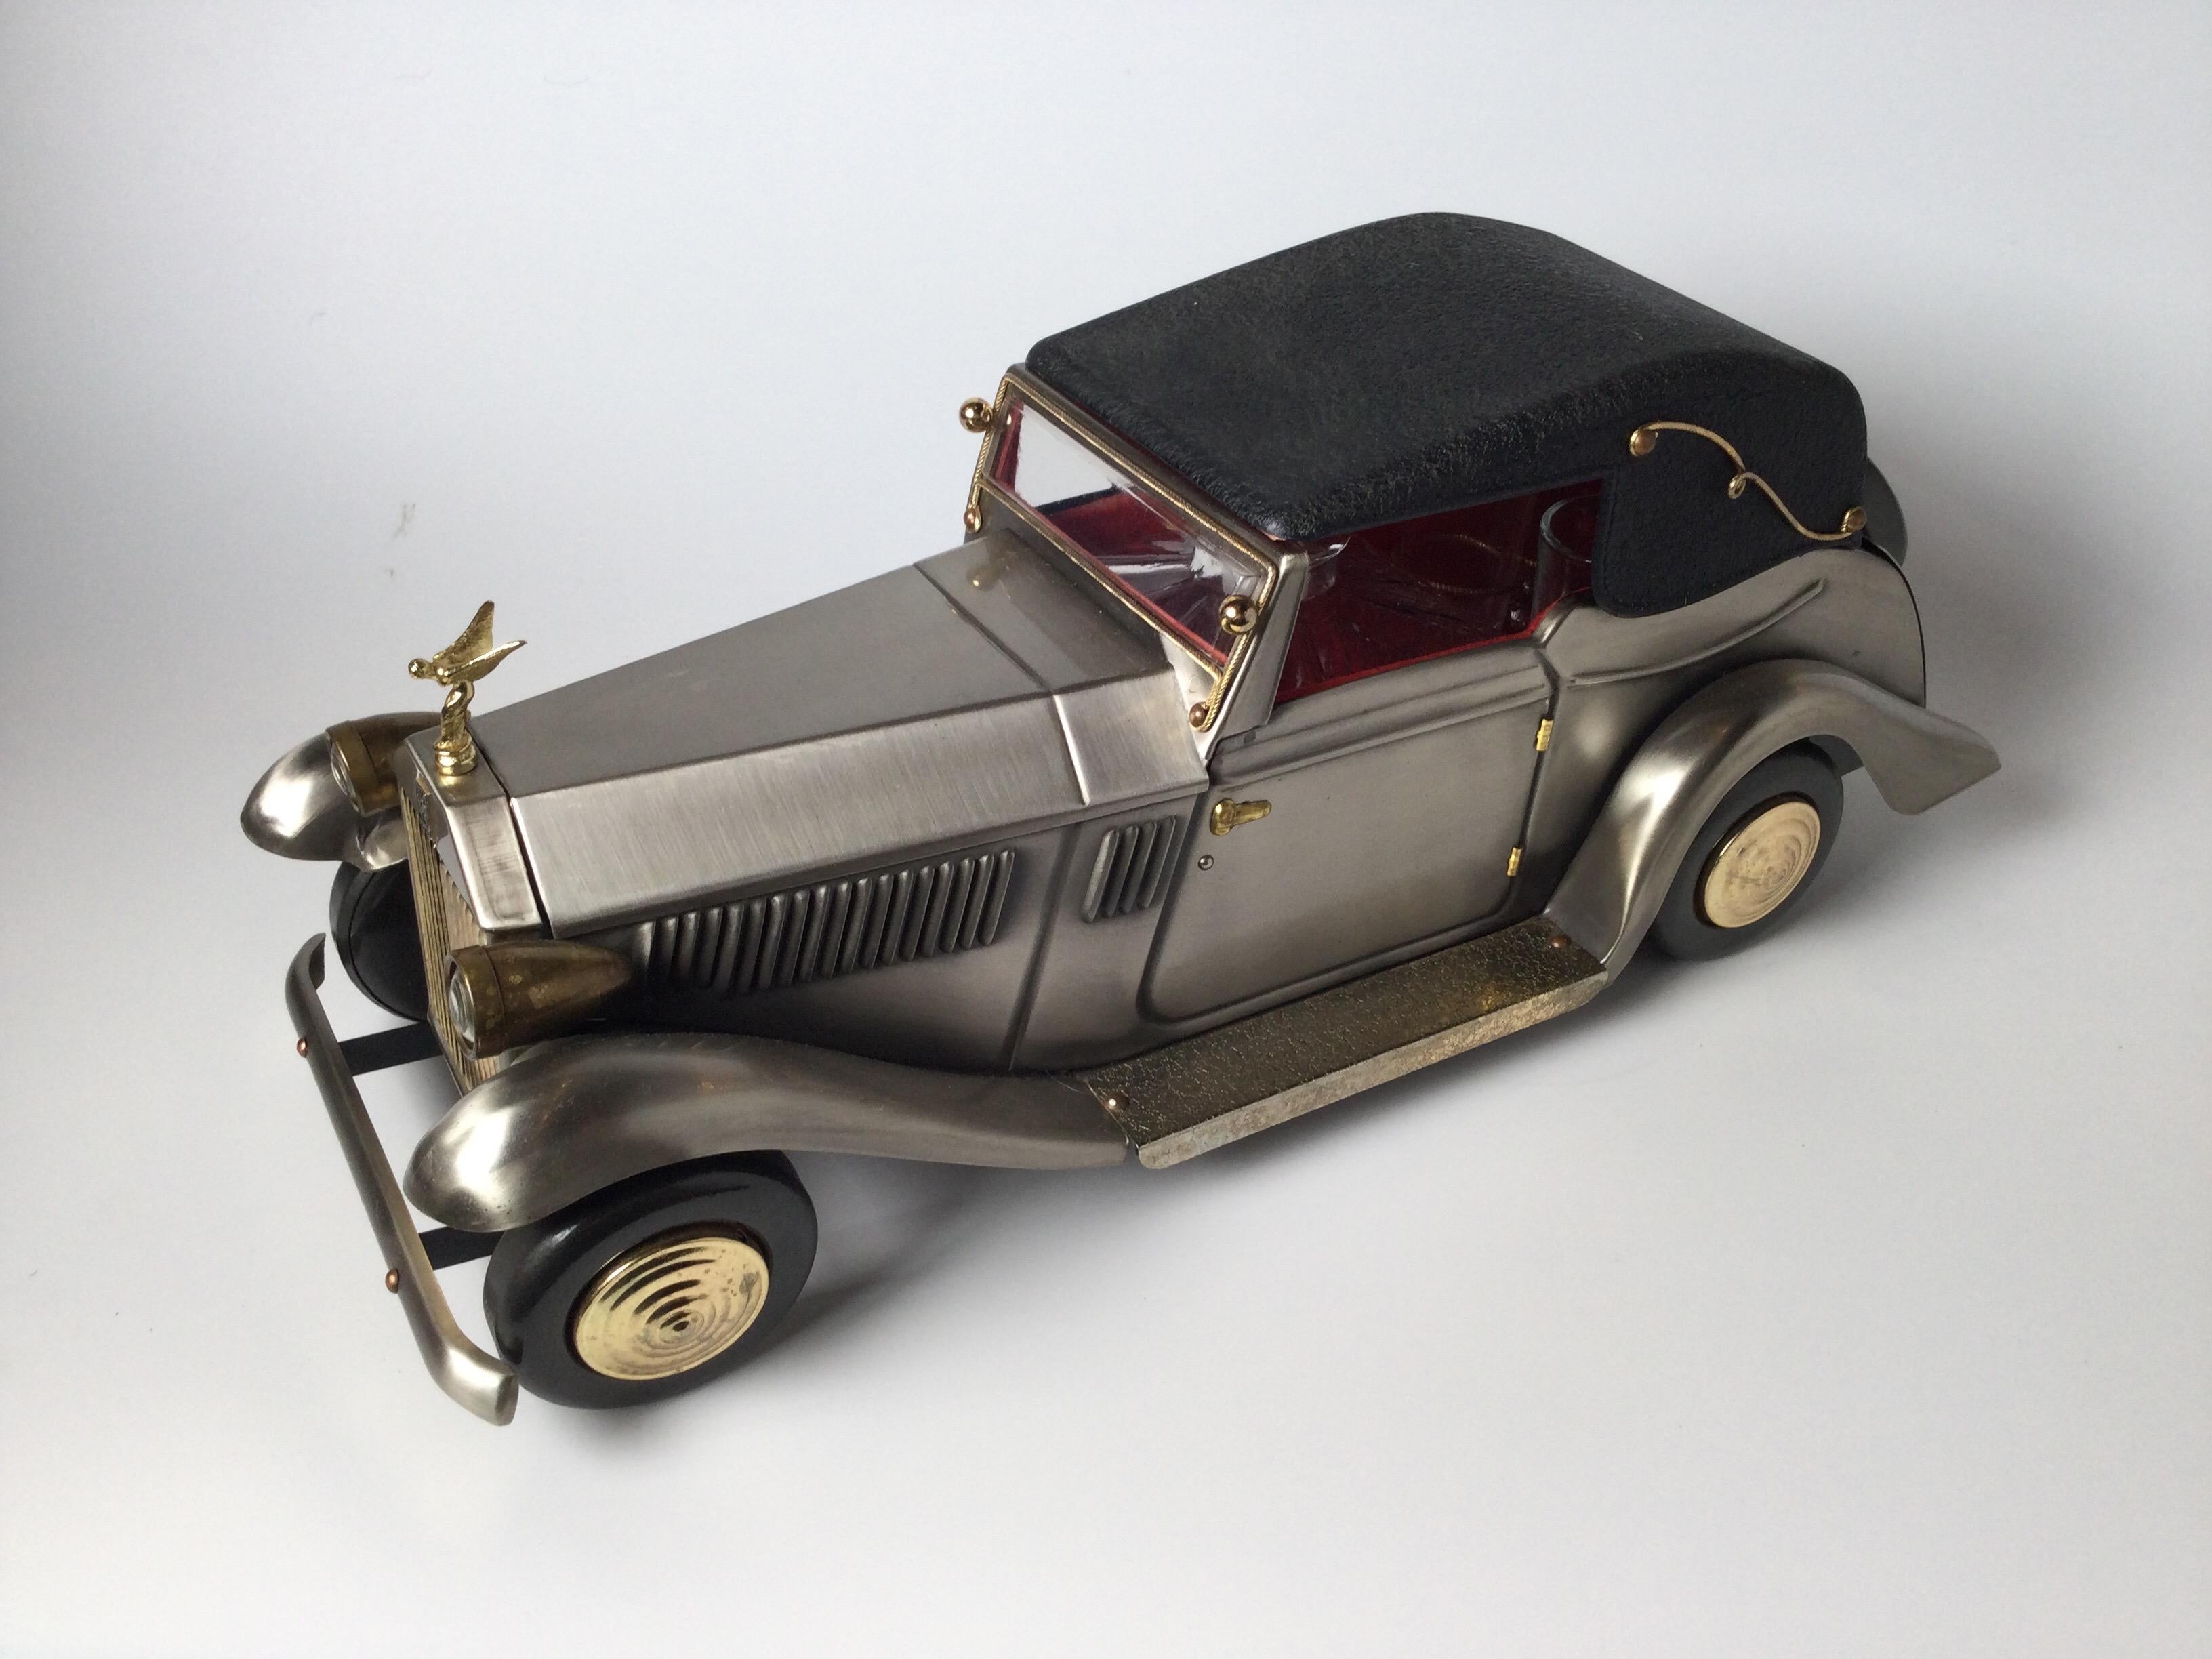 A whimsical drinks set in the form of a vintage Rolls Royce car. Set includes the car holder, with a decanter and four glasses. The car with a musical mechanism that plays around the world in 80 days.